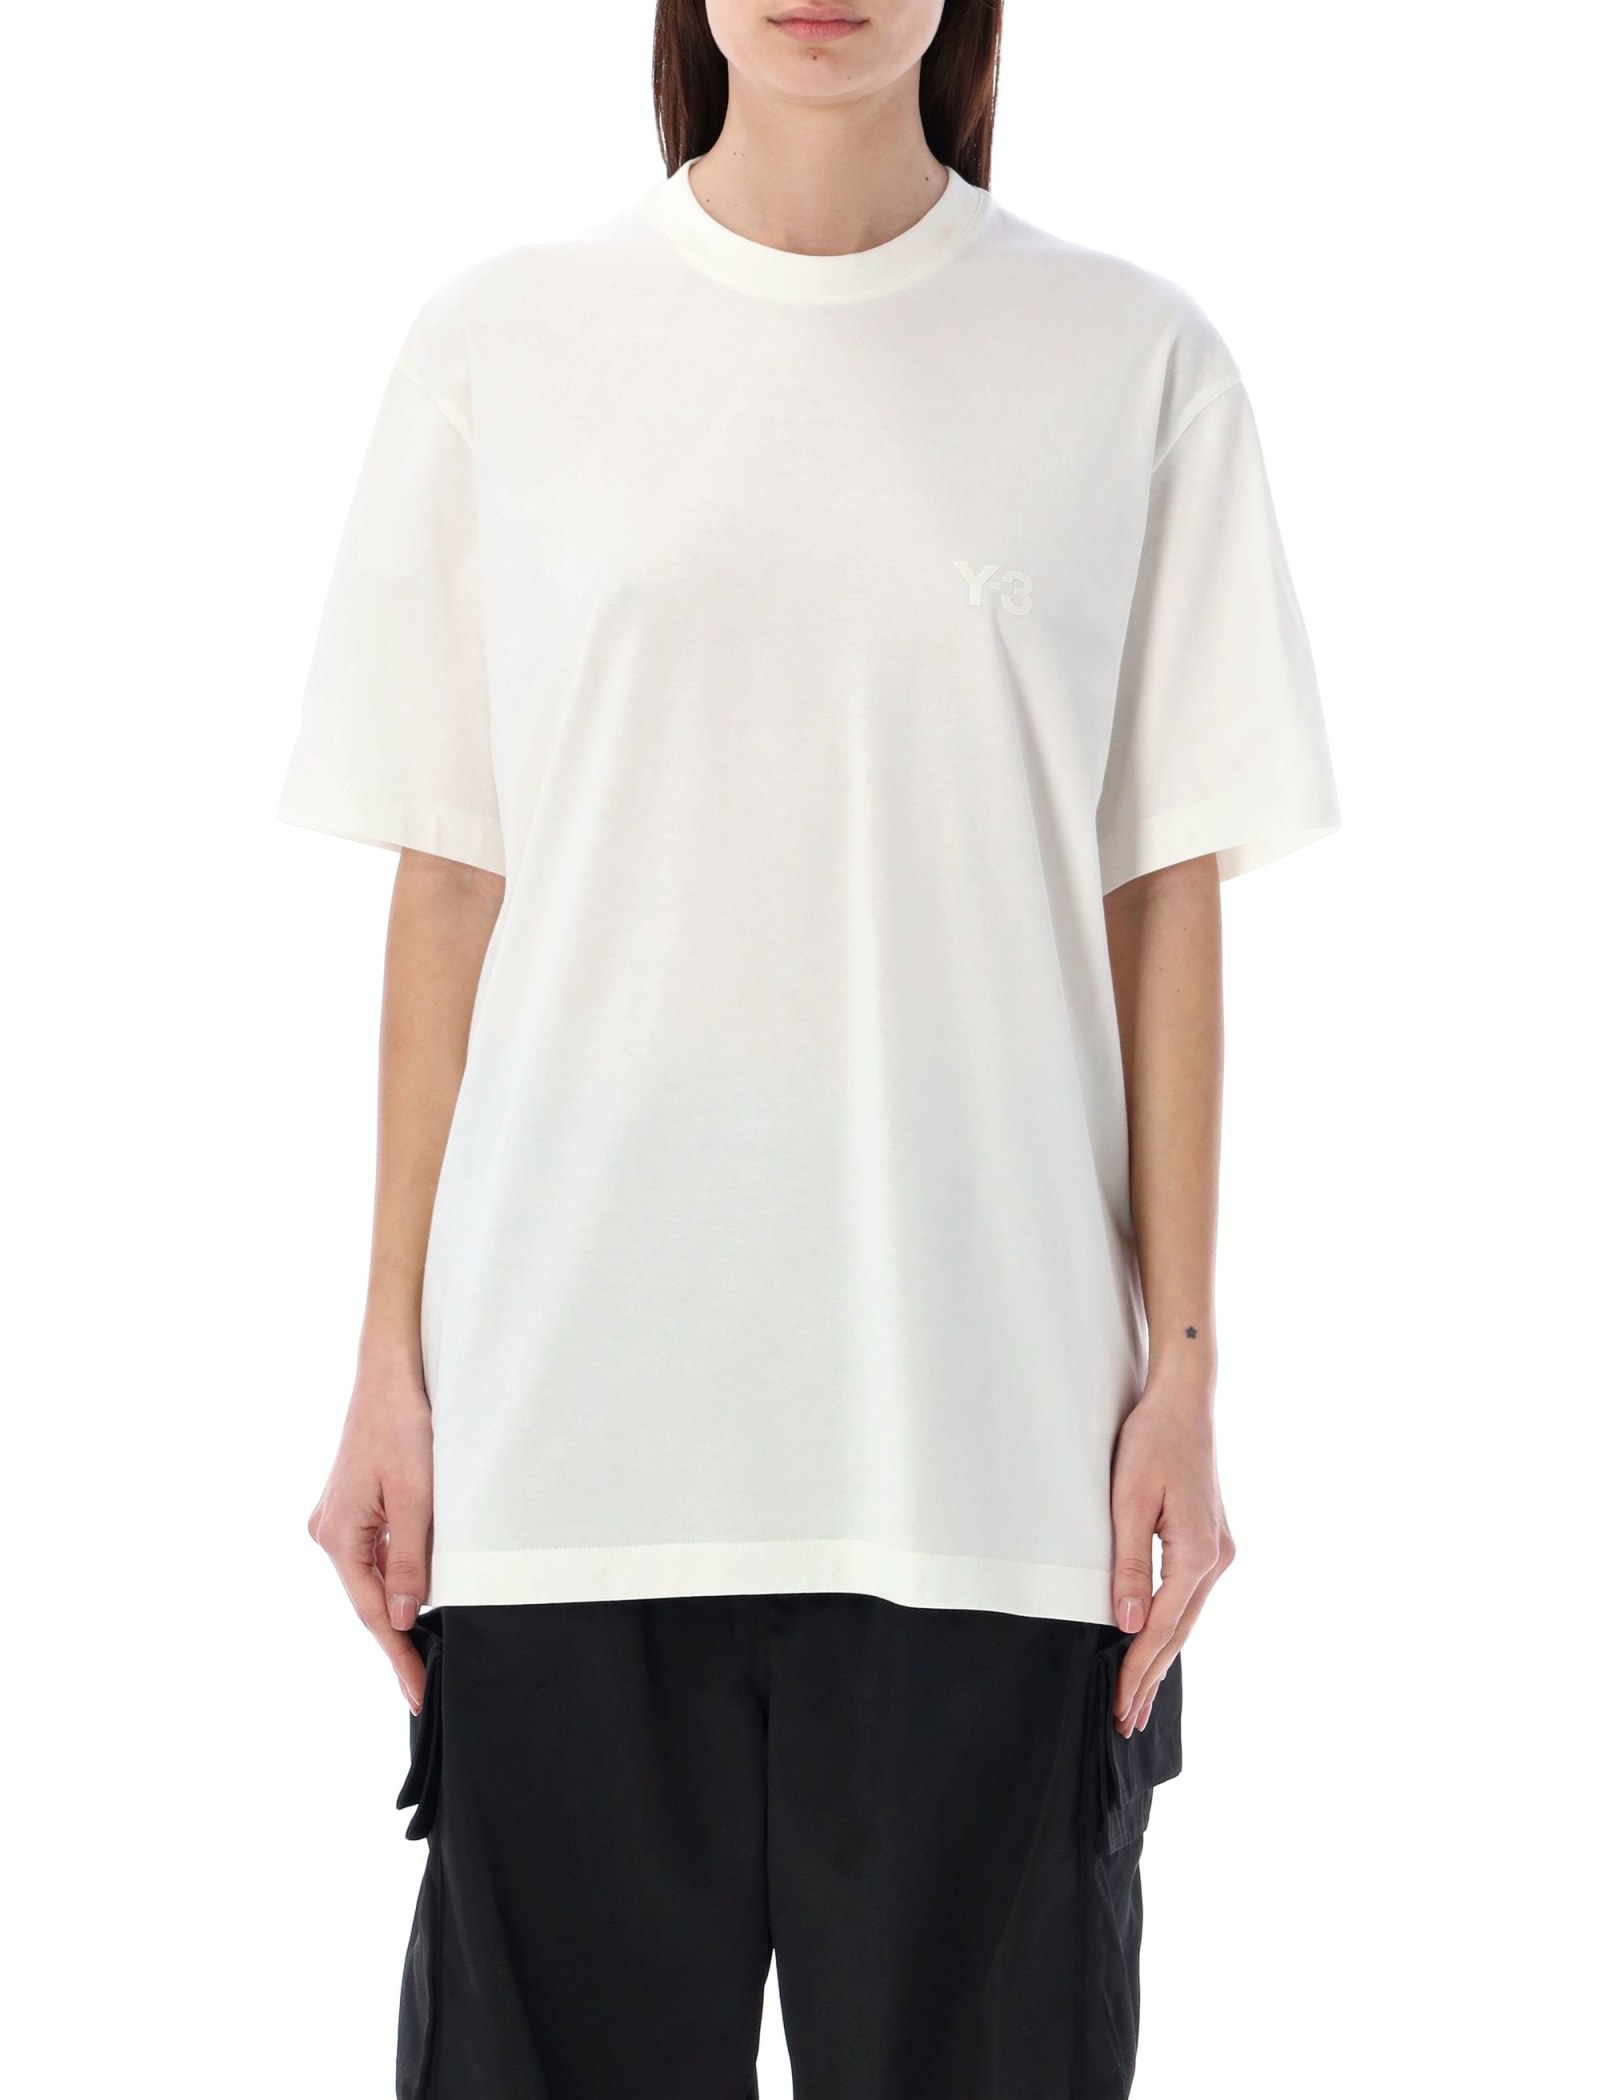 Relaxed S/s Tee